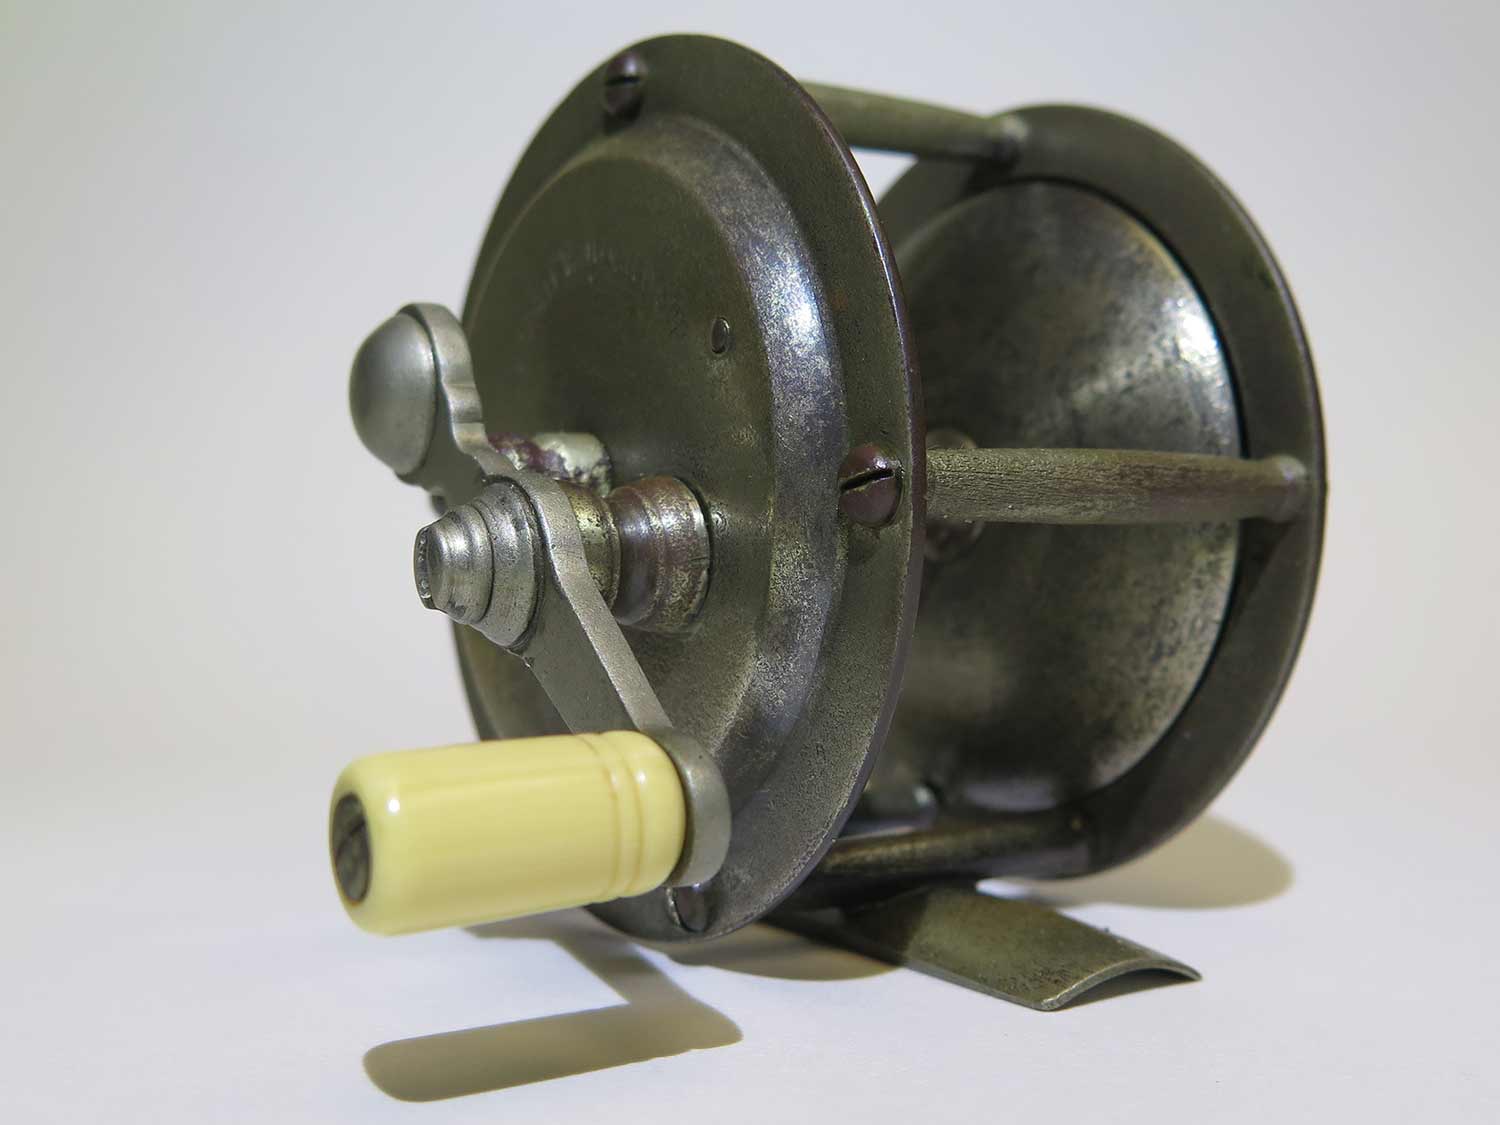 Early British Multiplier Winches - Reely Old Reels